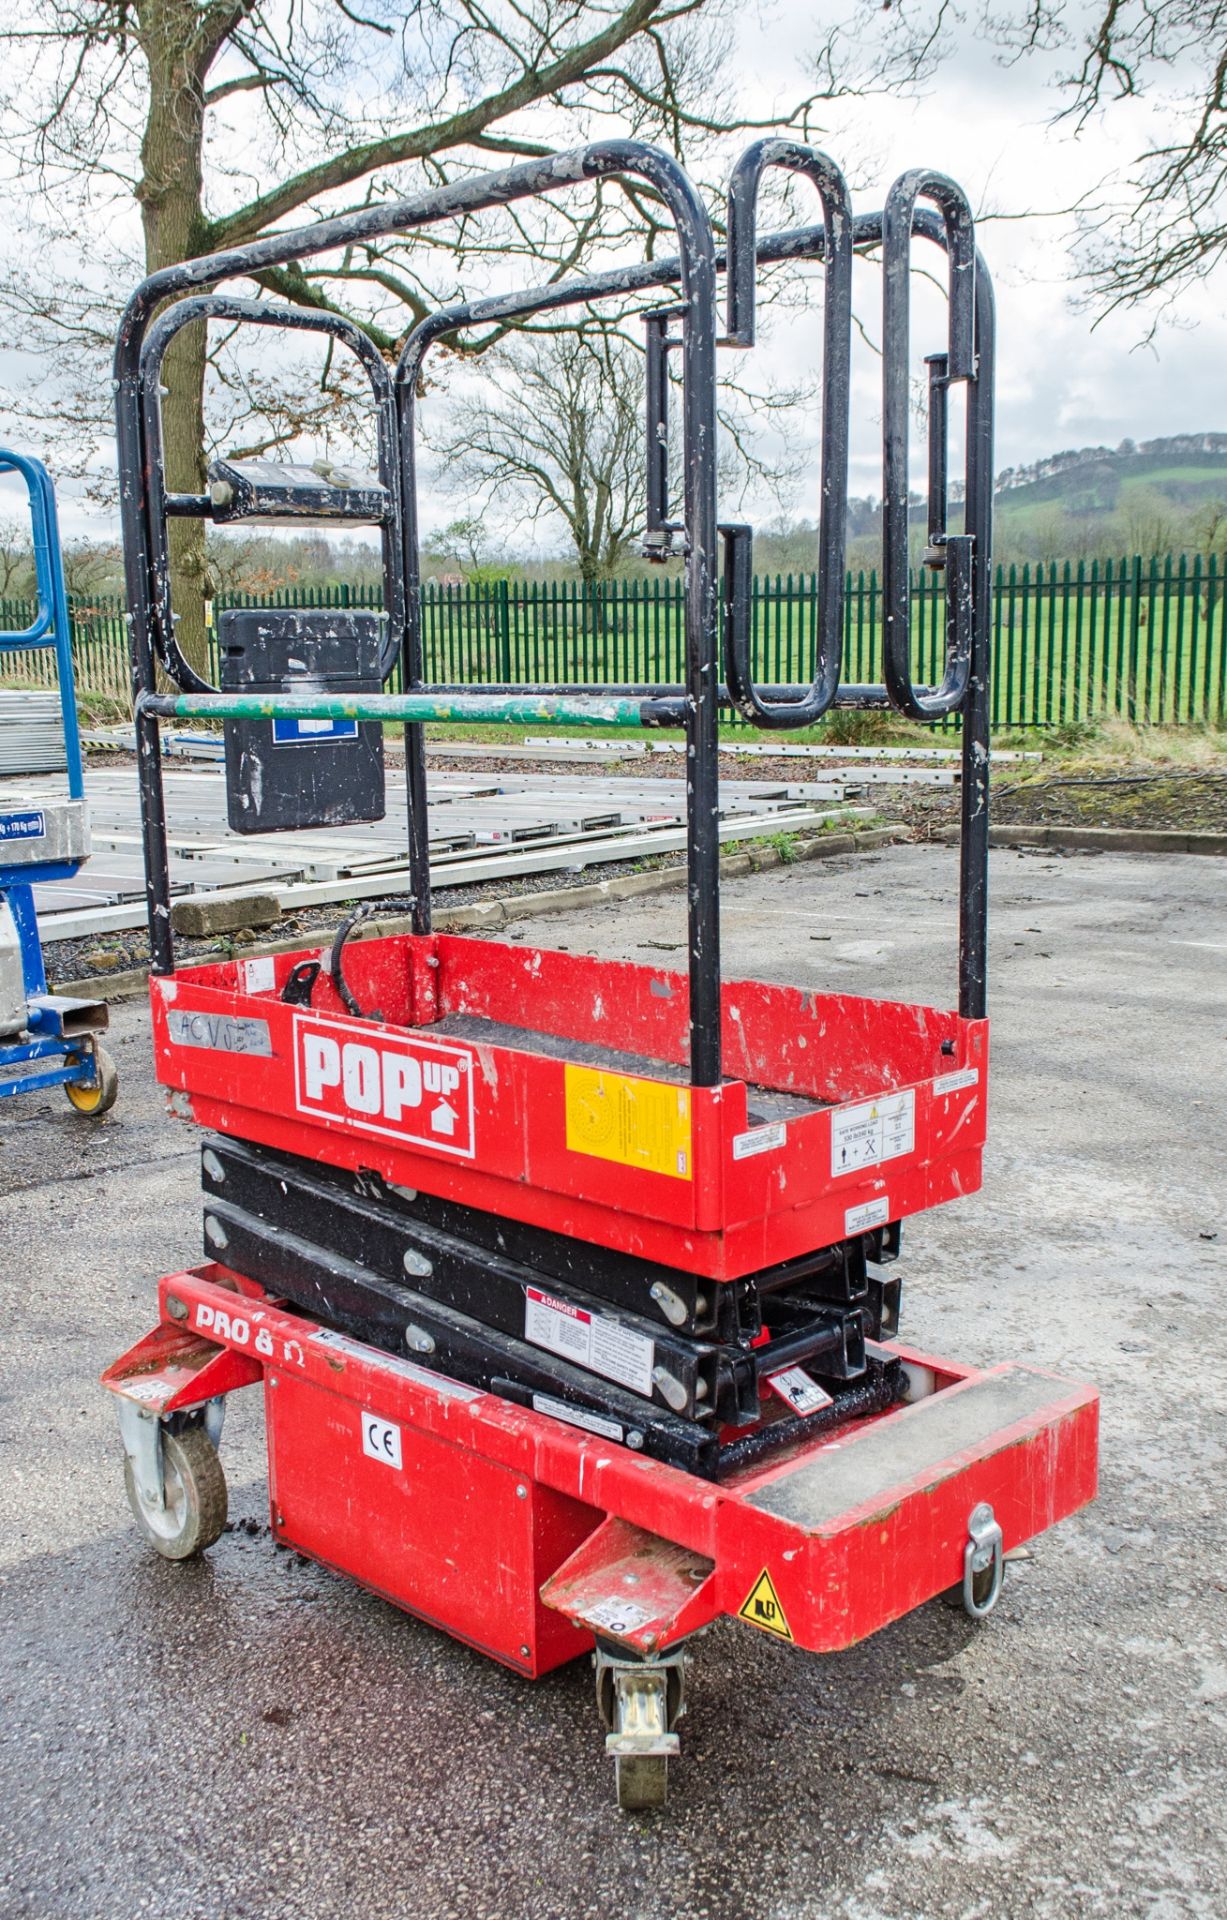 Pop Up Pro 8 battery electric push around access platform A856605 - Image 2 of 6